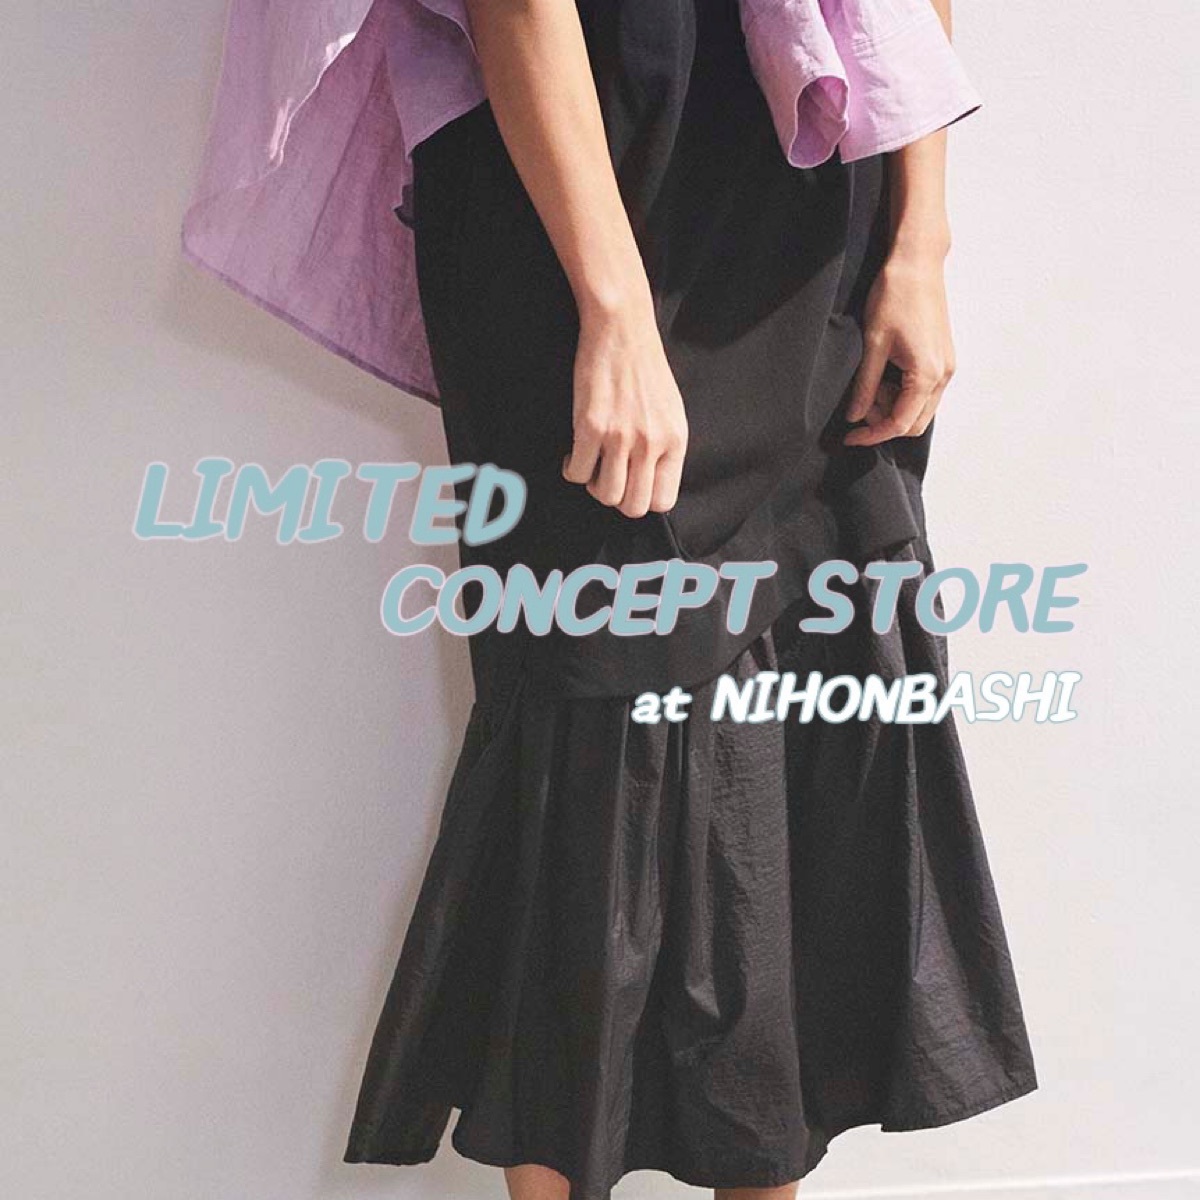 vol.2 日本橋LIMITED CONCEPT STORE